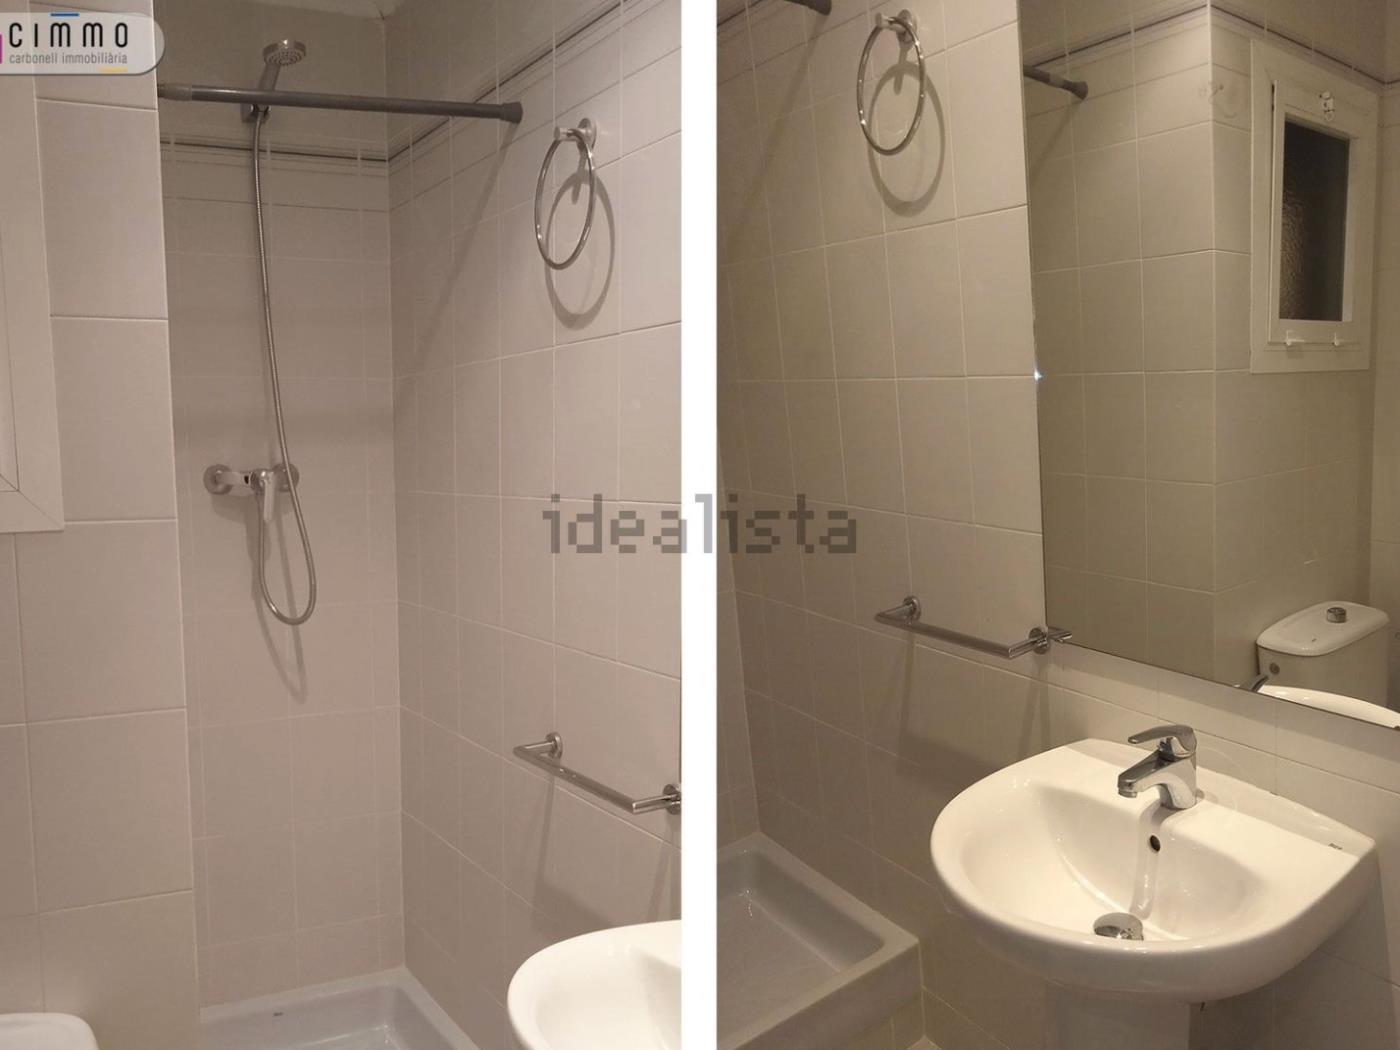 3-bedroom Seasonal rental ideal for companies and students - My Space Barcelona Apartments